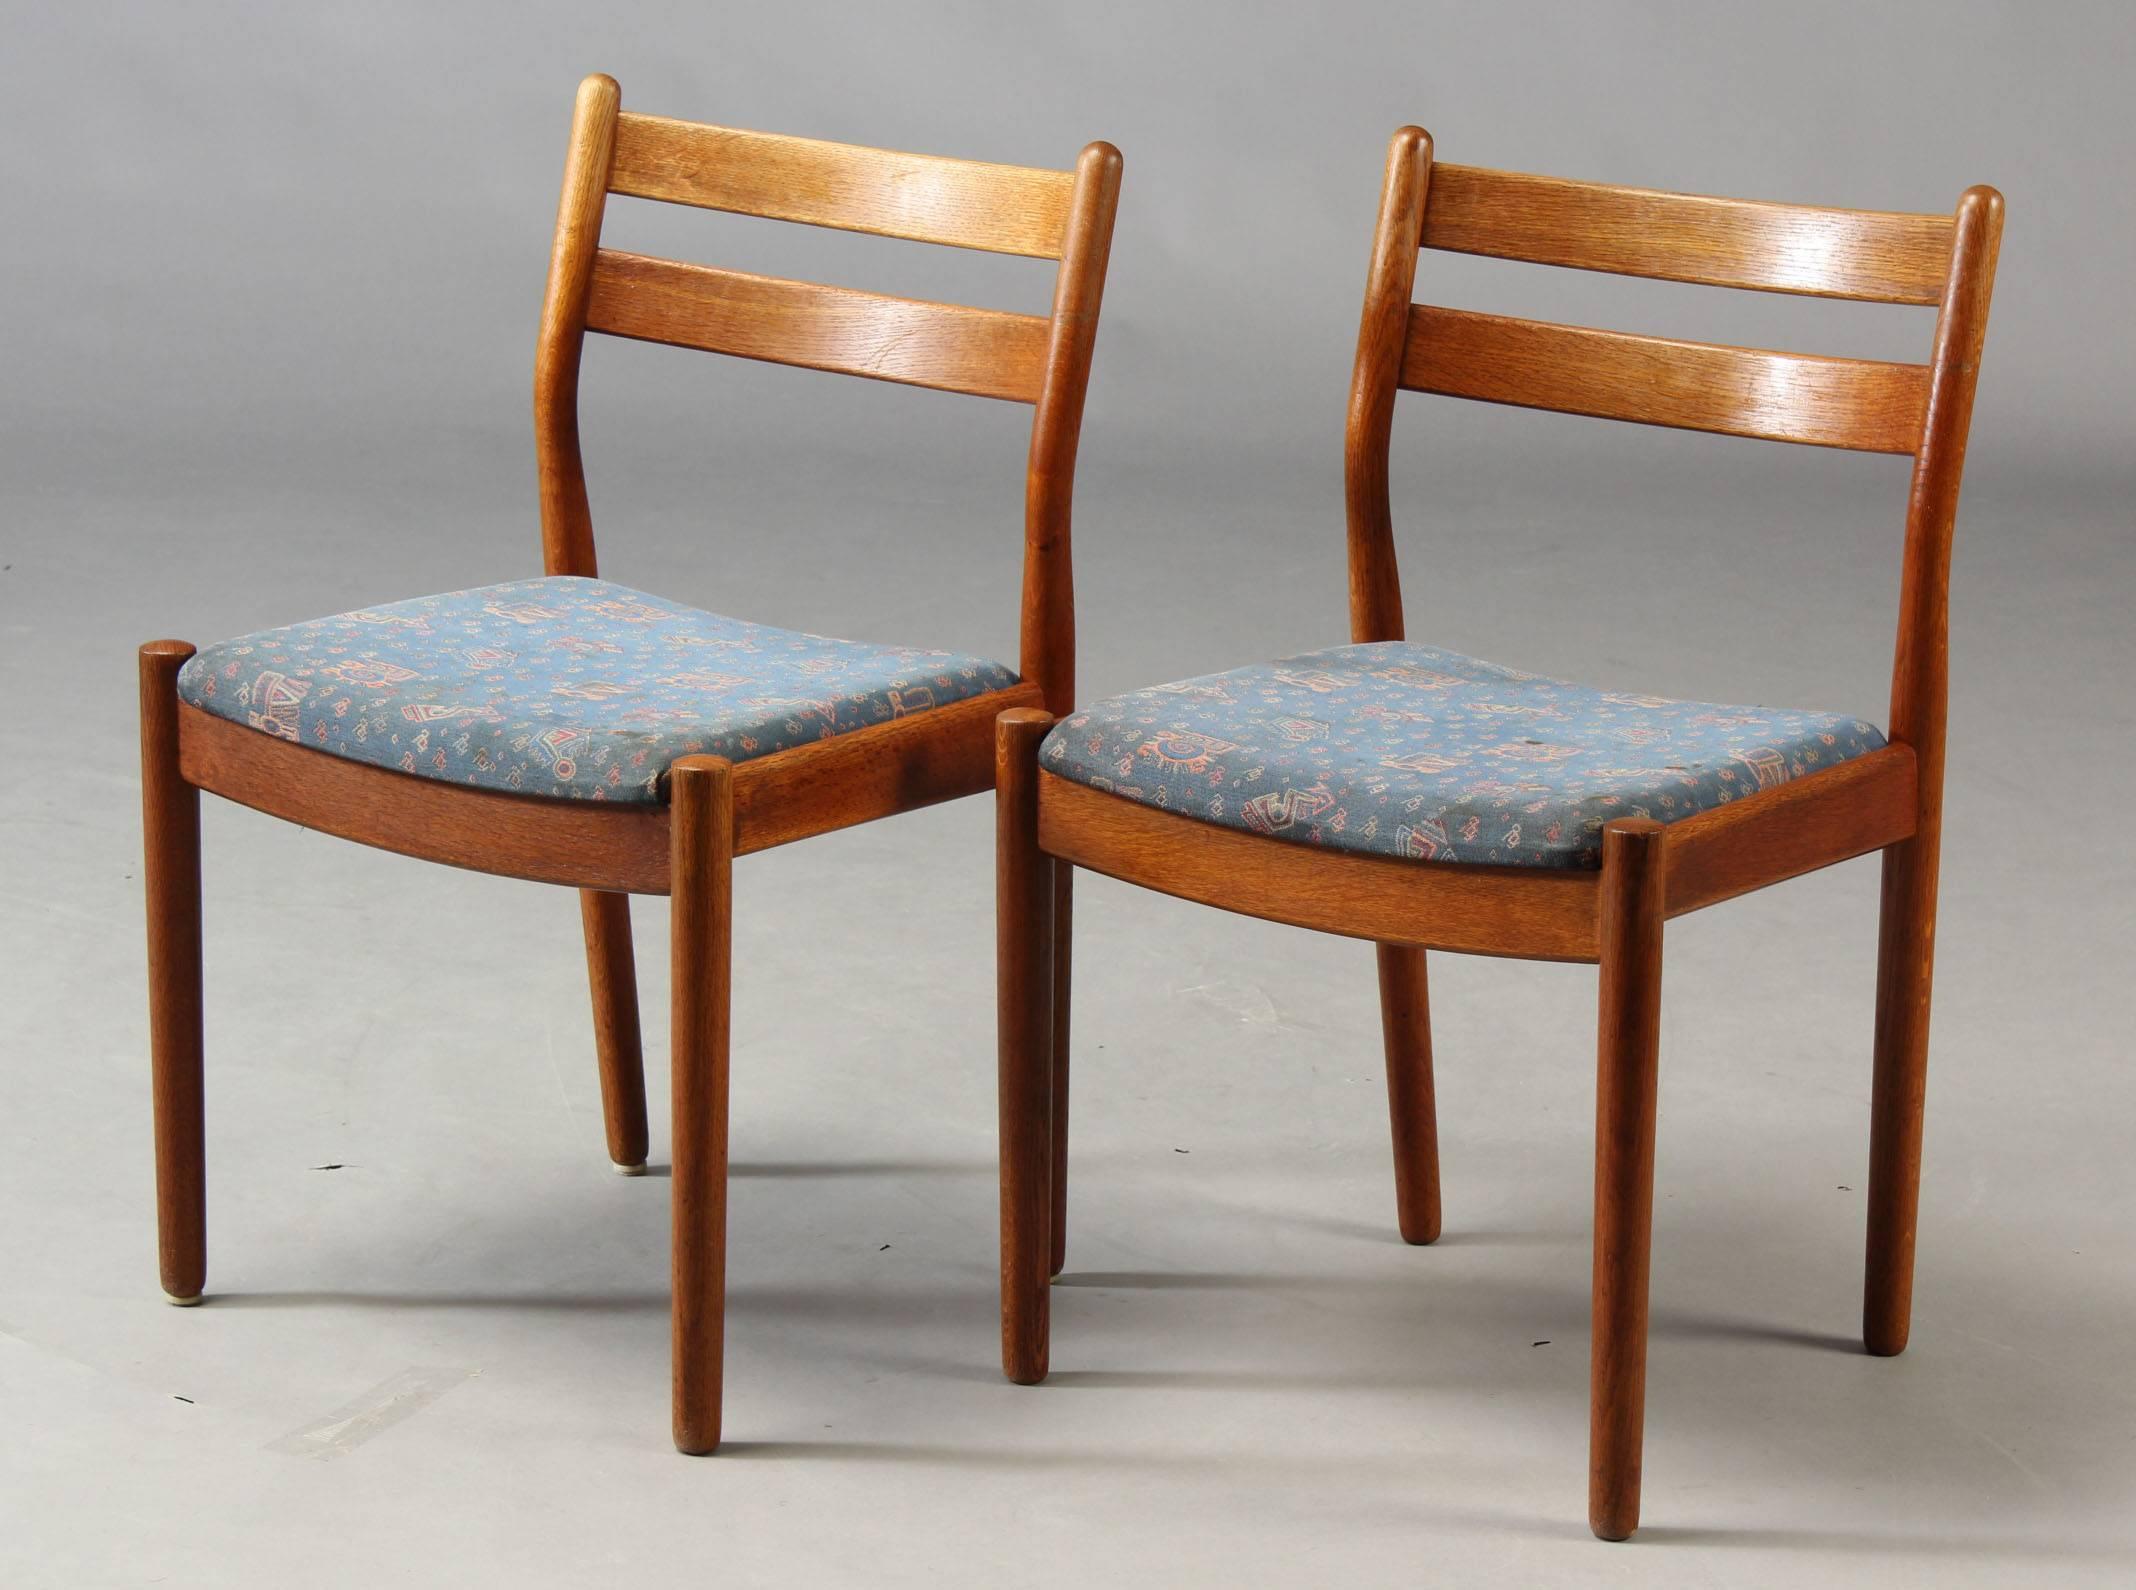 Scandinavian Modern 1960s Set of Four Reupholstered Danish Dining Chairs Model J61 by Poul Volther